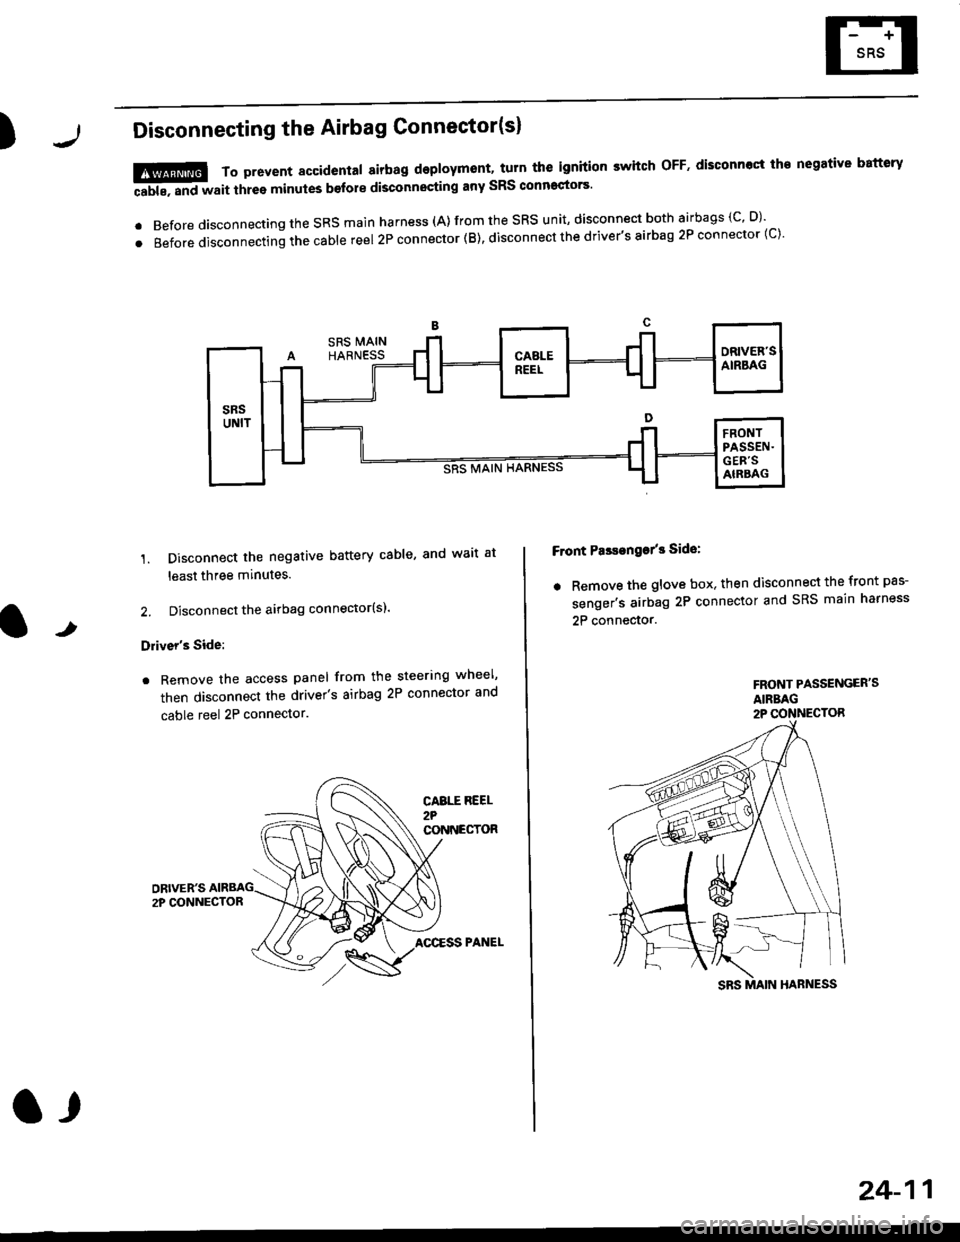 HONDA CIVIC 1997 6.G Workshop Manual )Disconnecting the Airbag Connector(sl
1. Disconnect the negative battery cable, and wait at
least three minutes.
2. Disconnect the airbag connector(sl.
Drivers Side:
. Remove the access panel from 